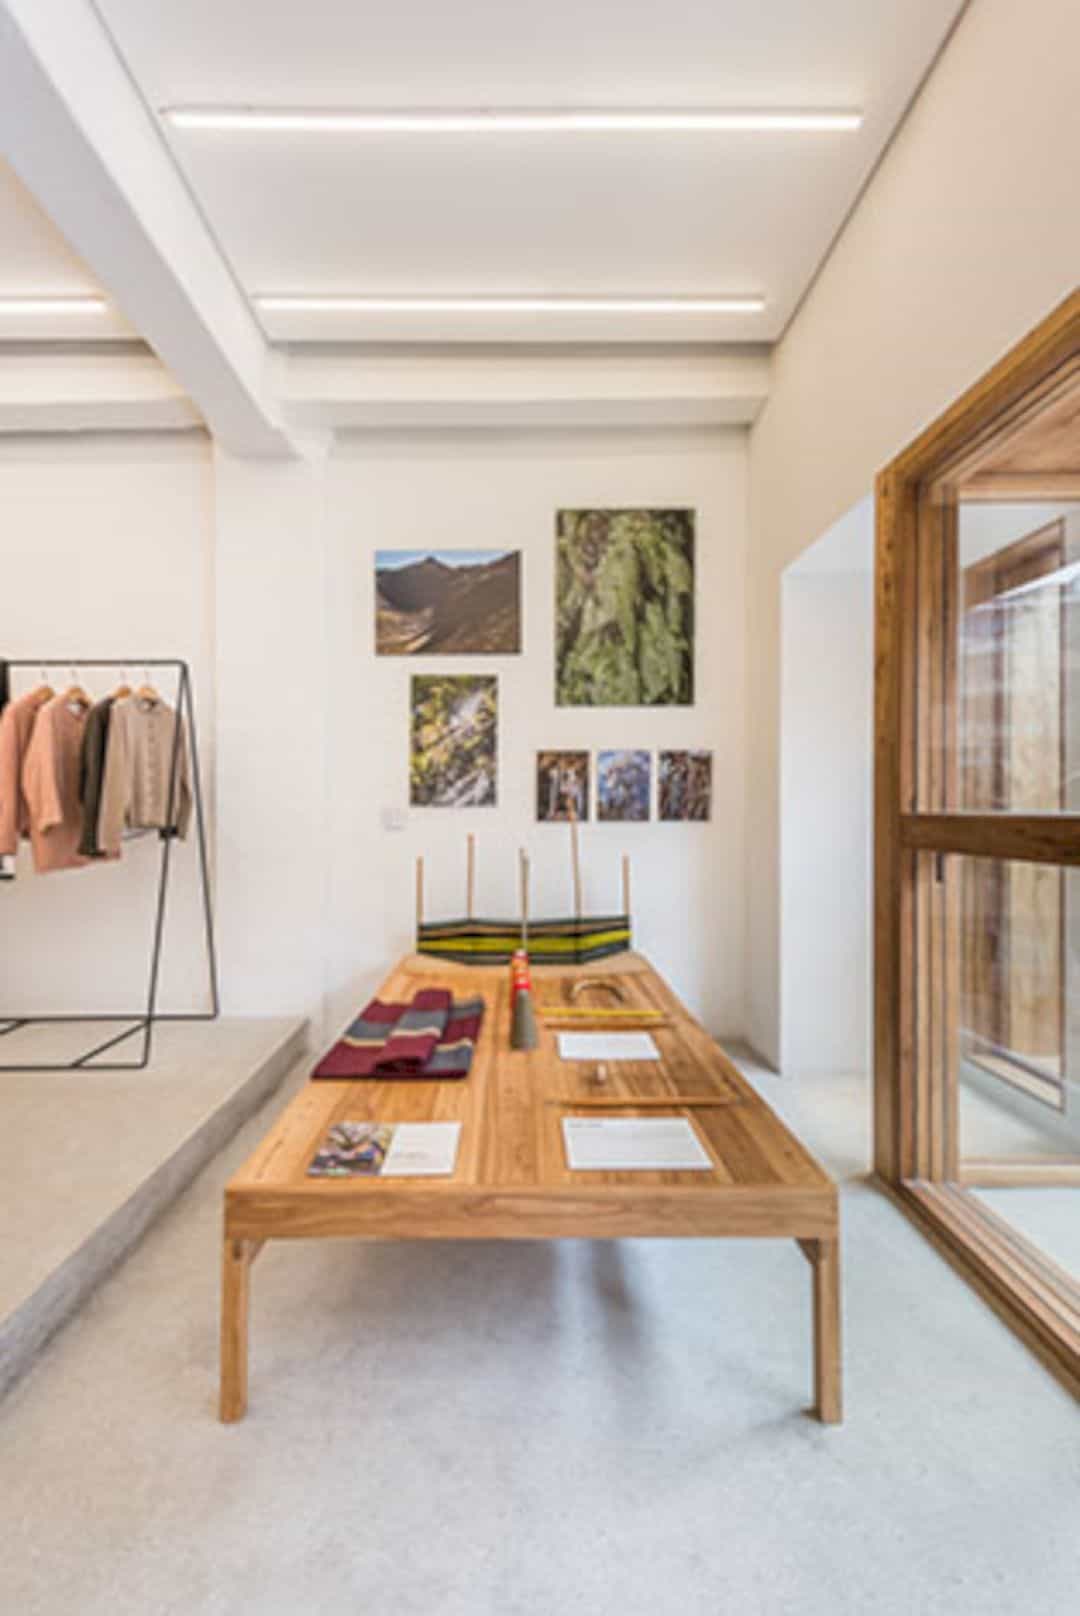 Klee Klee A Clothing Store To Reconnect With Natural Rhythm And Lifestyle 9